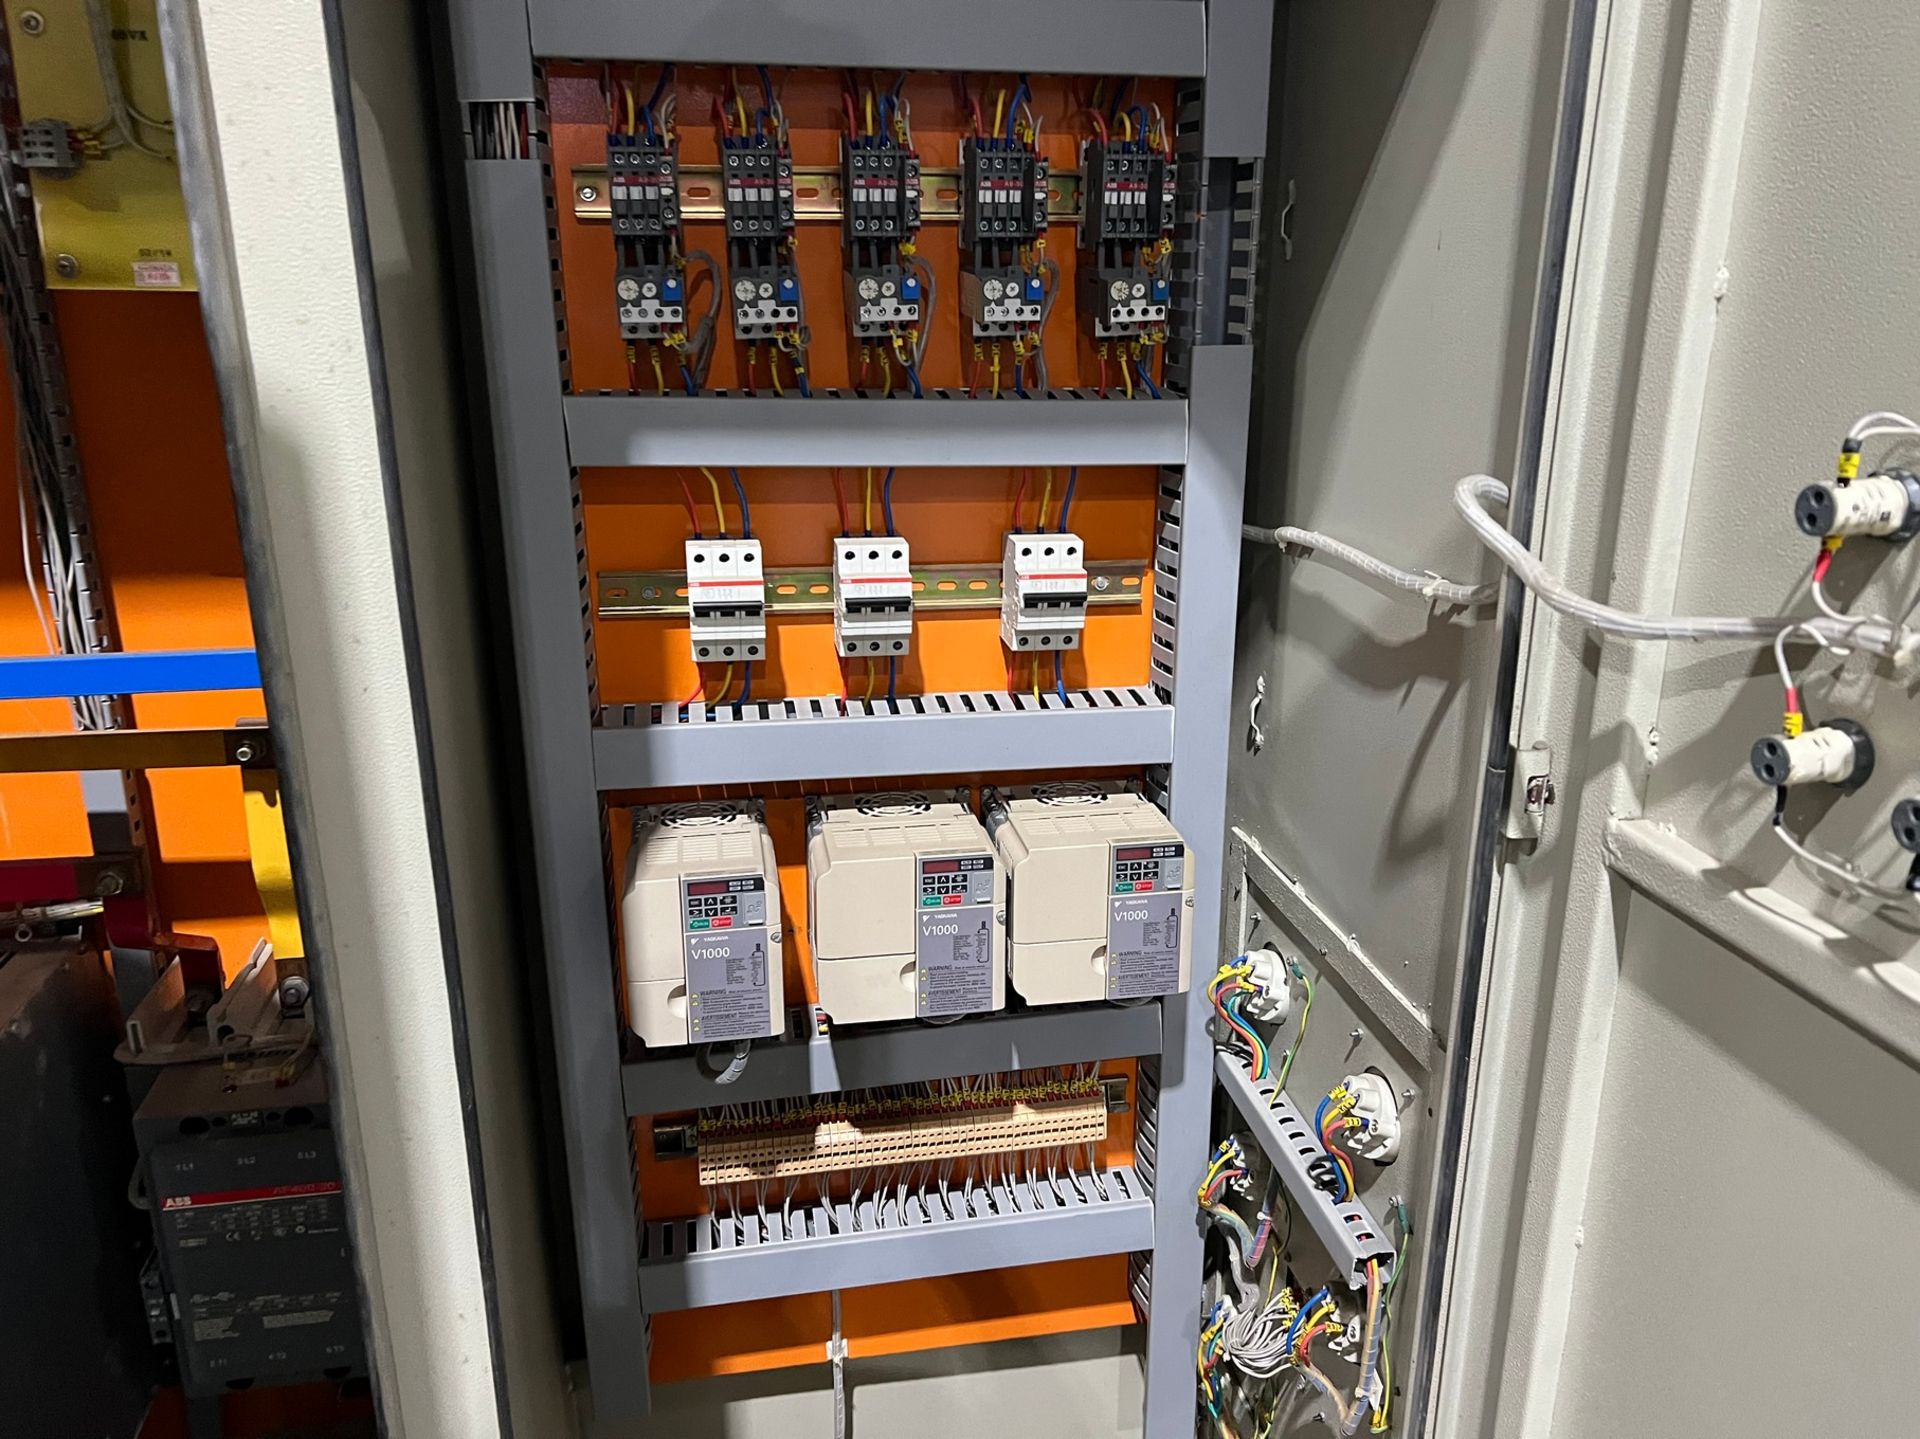 WASH LINE CONTROL PANELS, START/STOP CONTROL BUTTONS, YASKAWA AND ABB Drives - Image 8 of 16